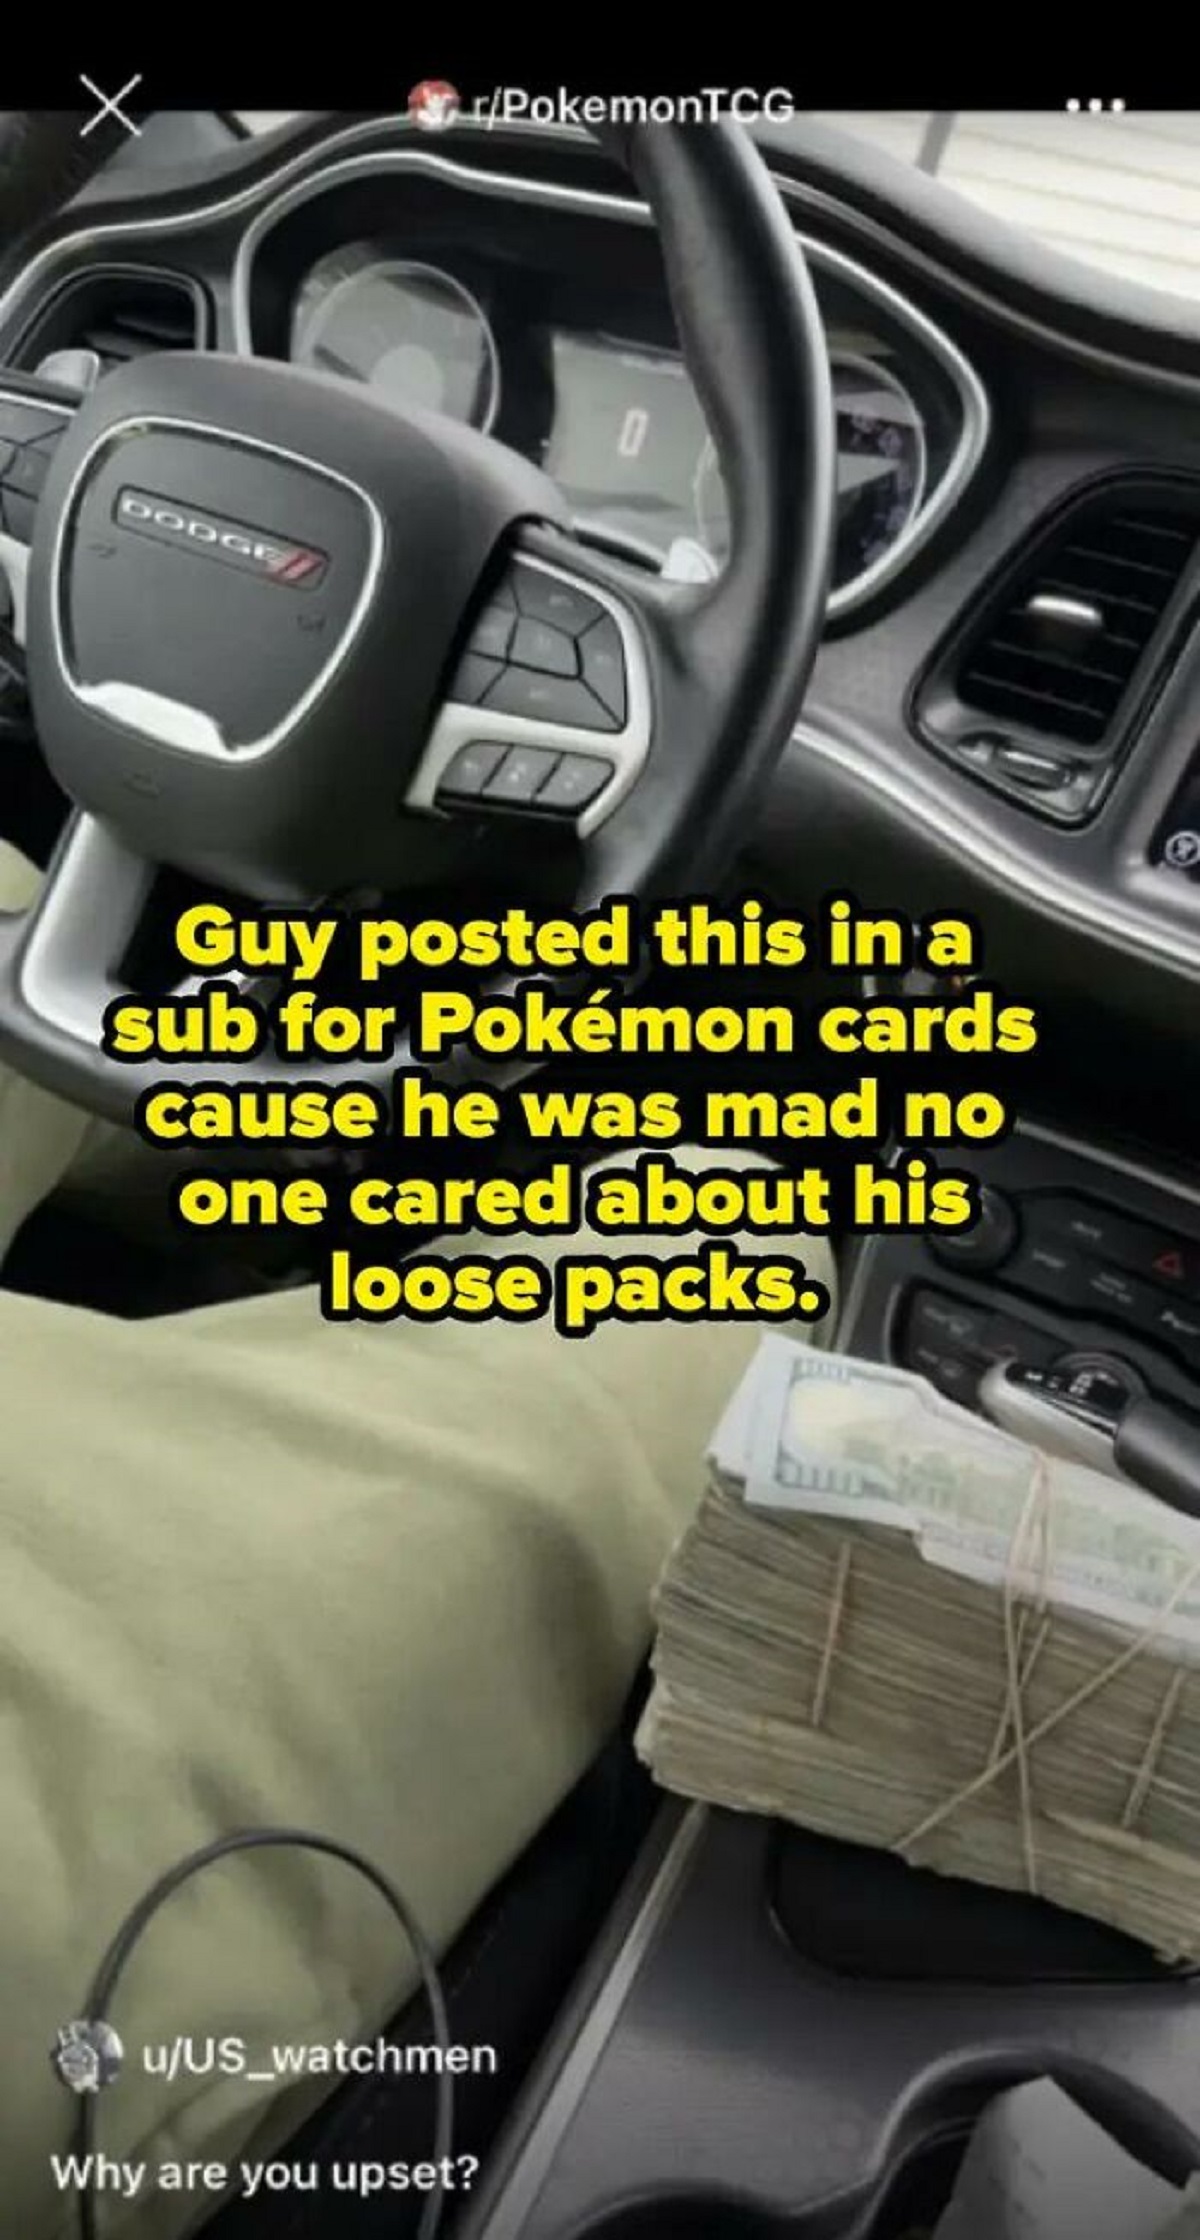 volvo v40 - rPokemontCO Guy posted this in a sub for Pokmon cards cause he was mad no one cared about his loose packs. uUs watchmen Why are you upset?